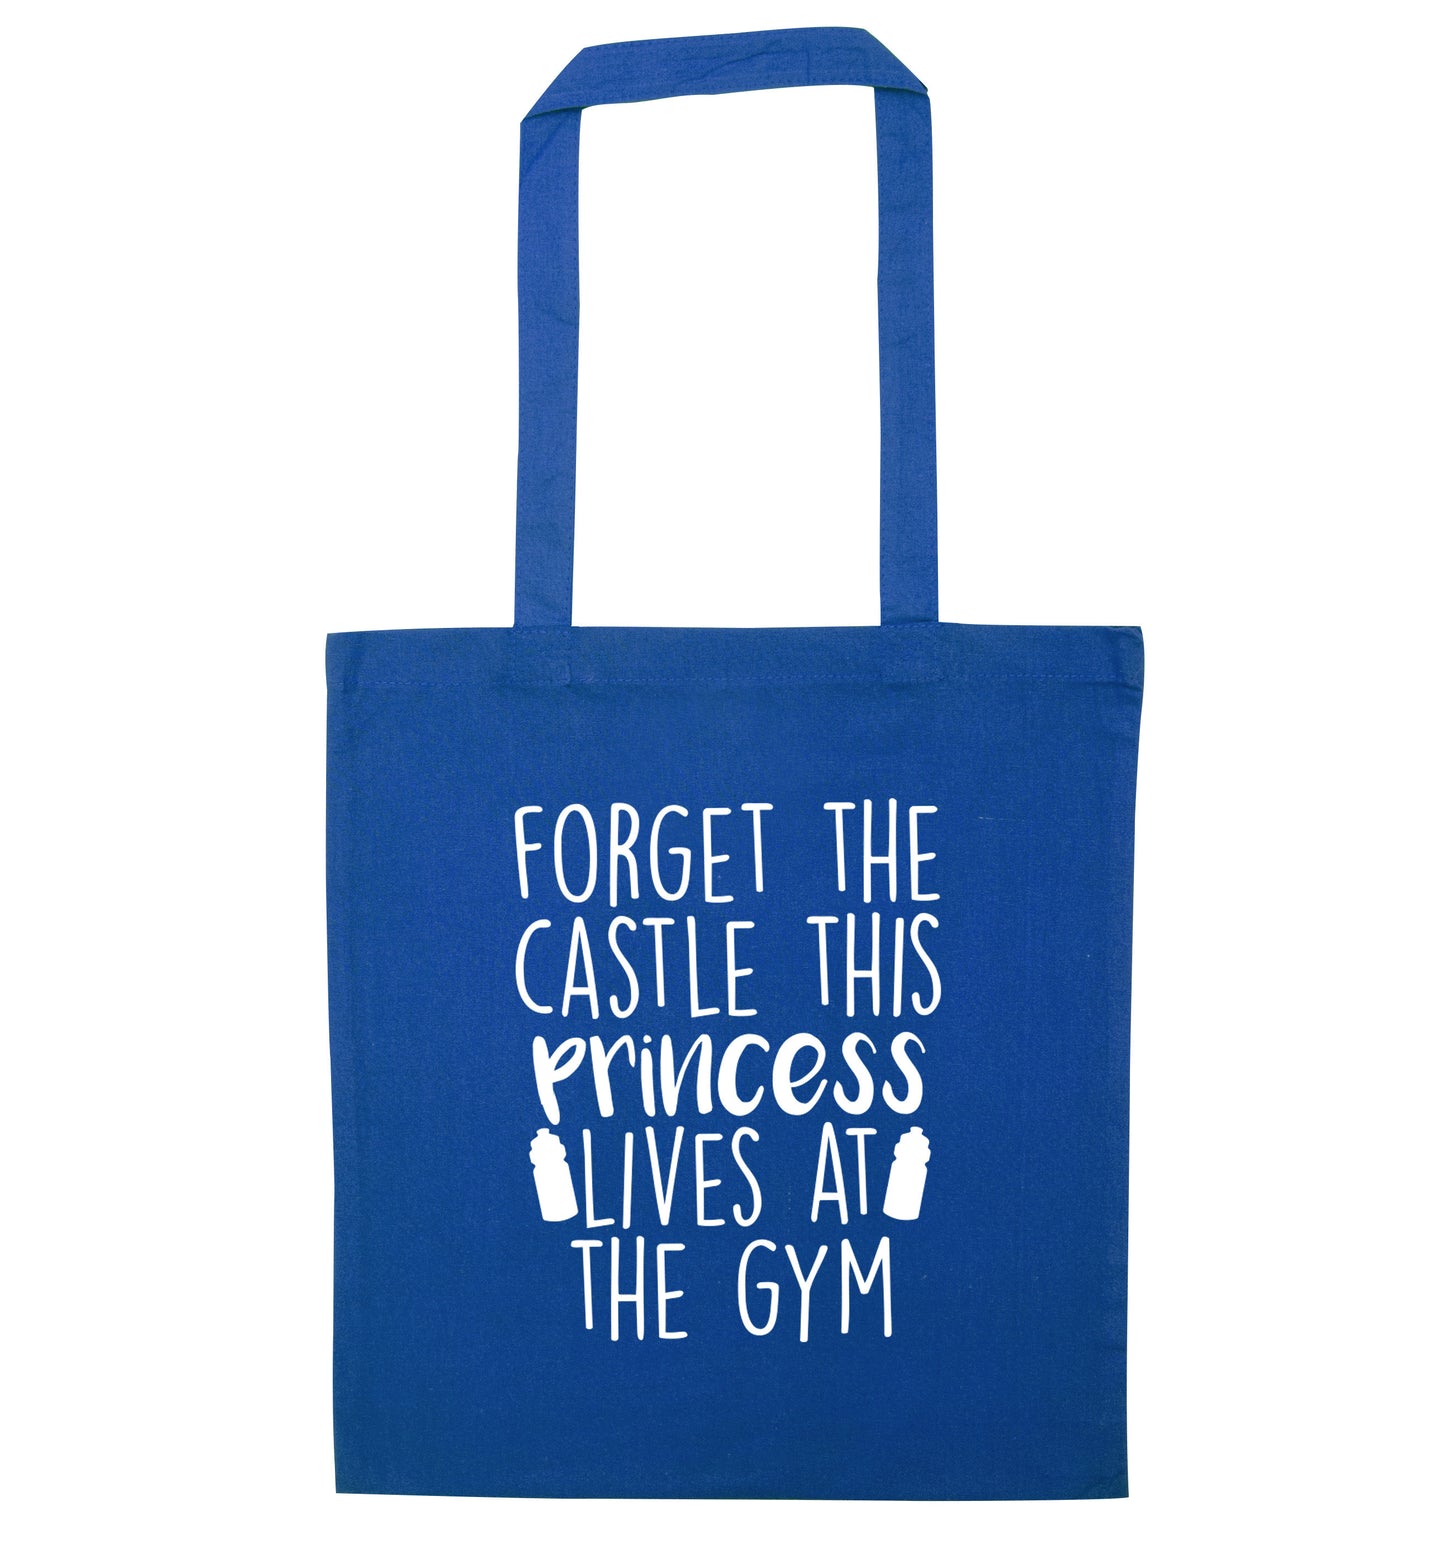 Forget the castle this princess lives at the gym blue tote bag